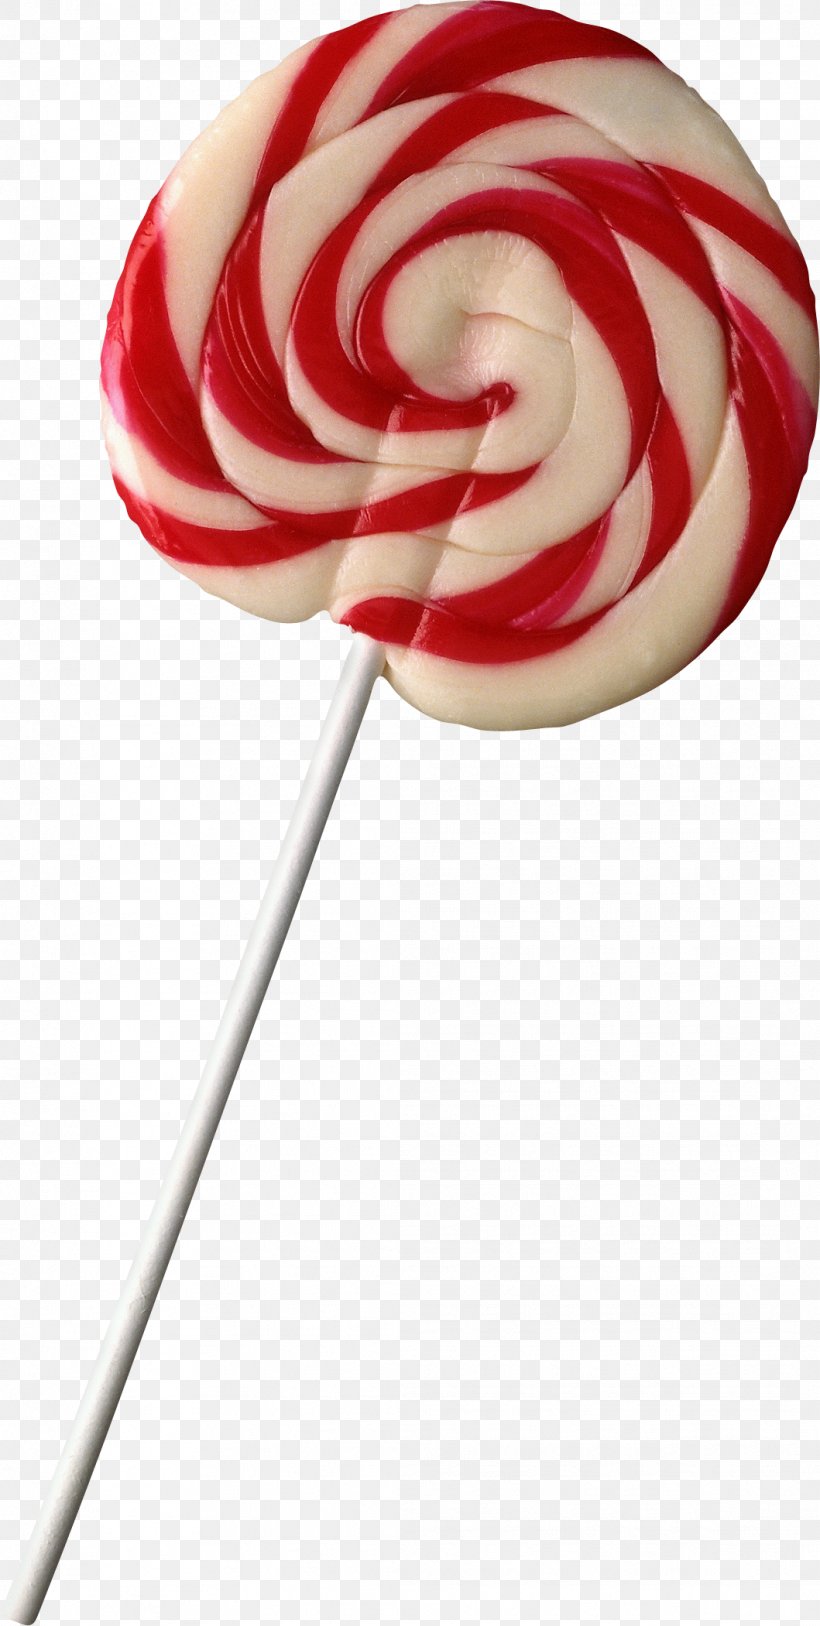 Lollipop Dessert Candy, PNG, 1059x2101px, Lollipop, Candy, Candy Cane, Chupa Chups, Confectionery Download Free